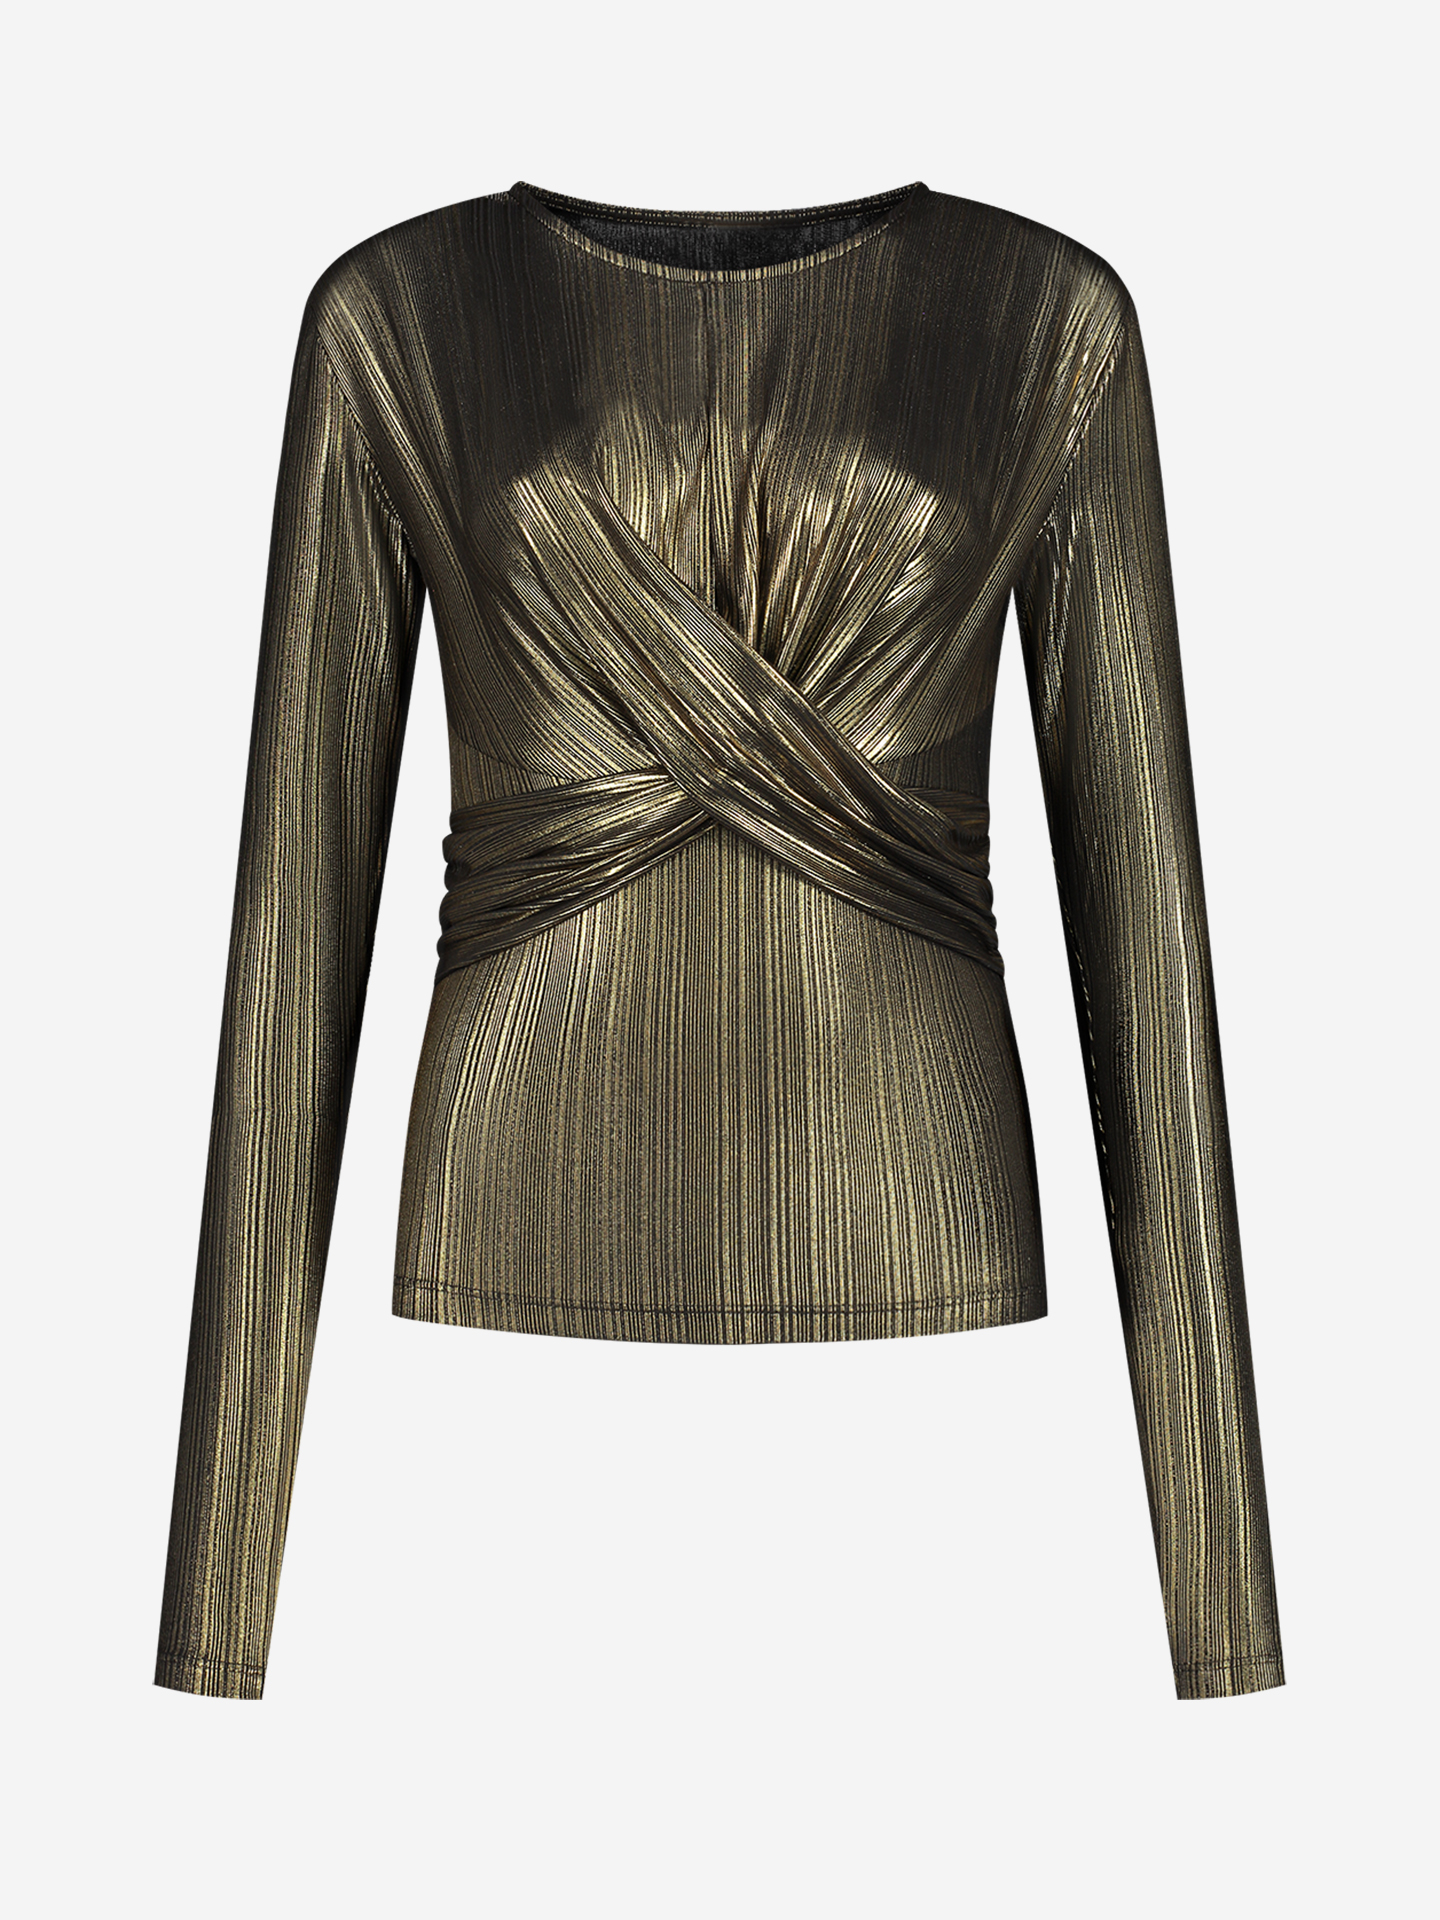  Fitted metallic top 